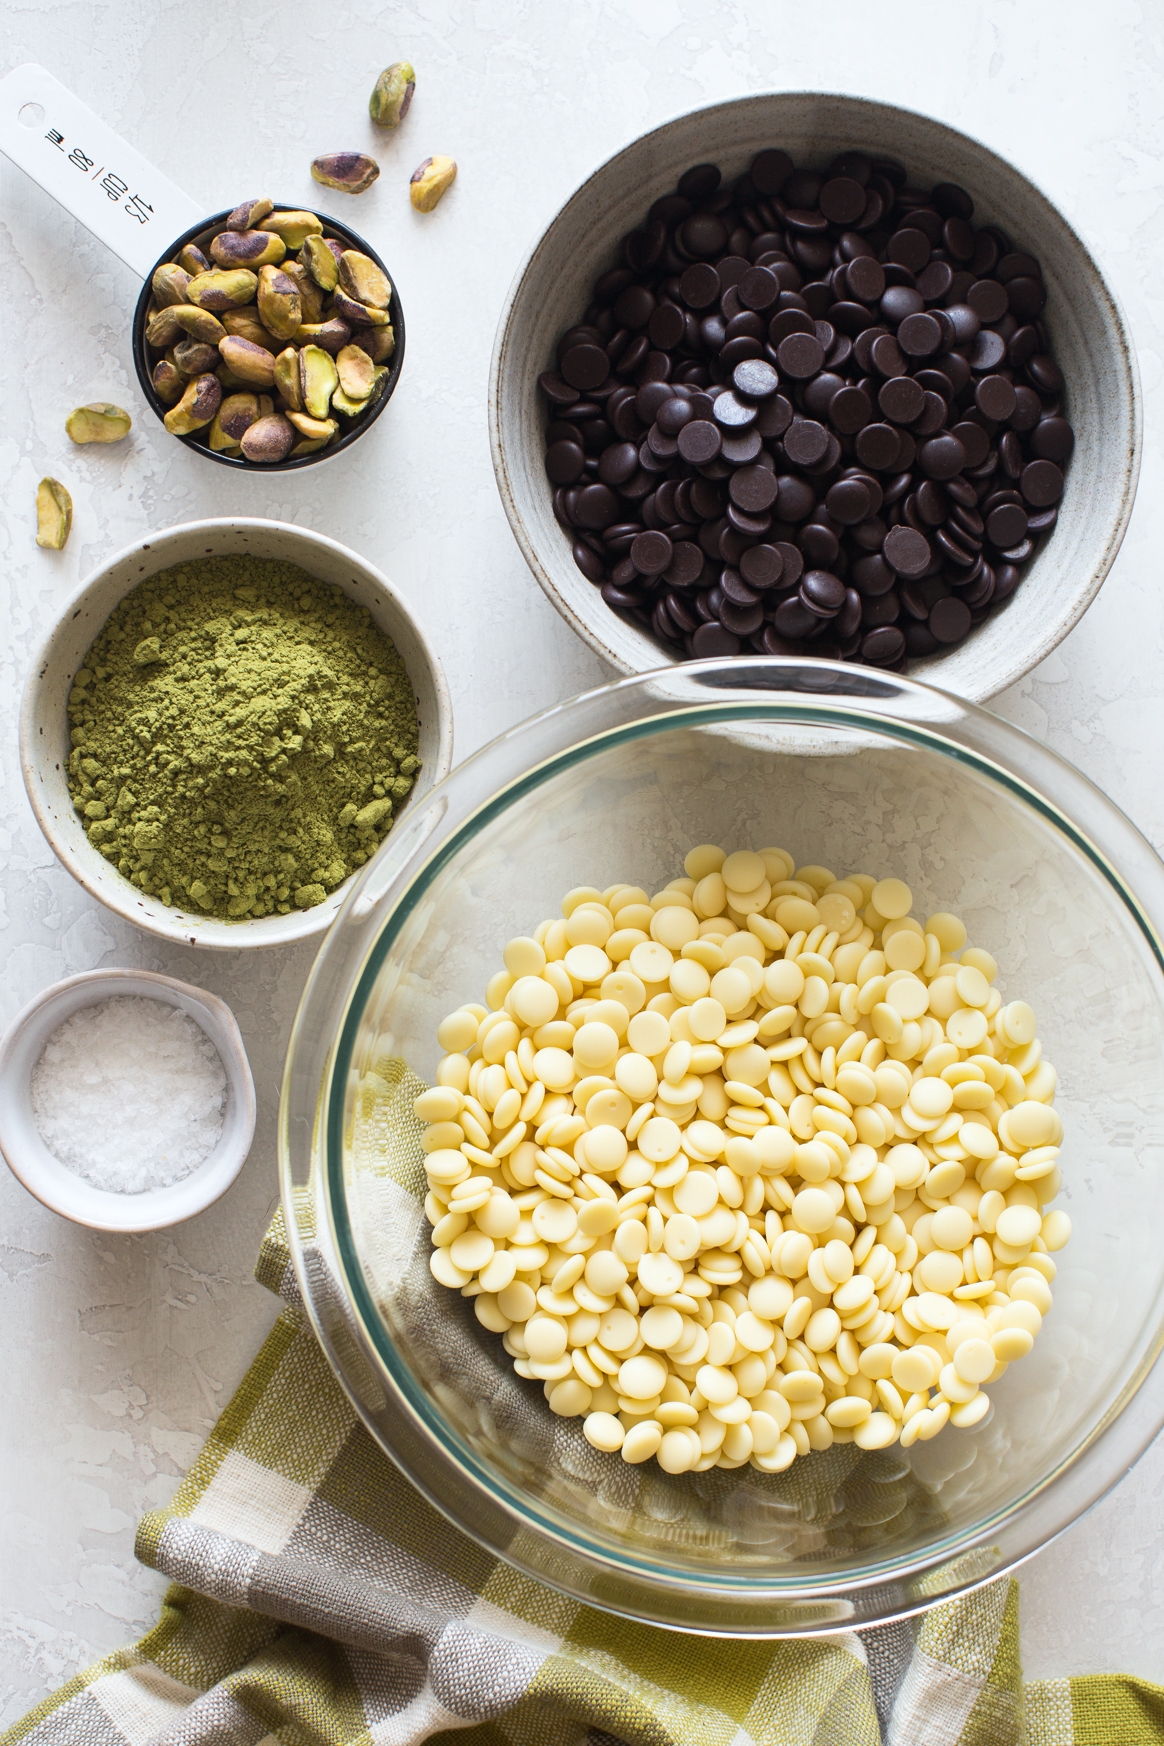 Double Chocolate Matcha Bark with Toasted Pistachios Ingredients